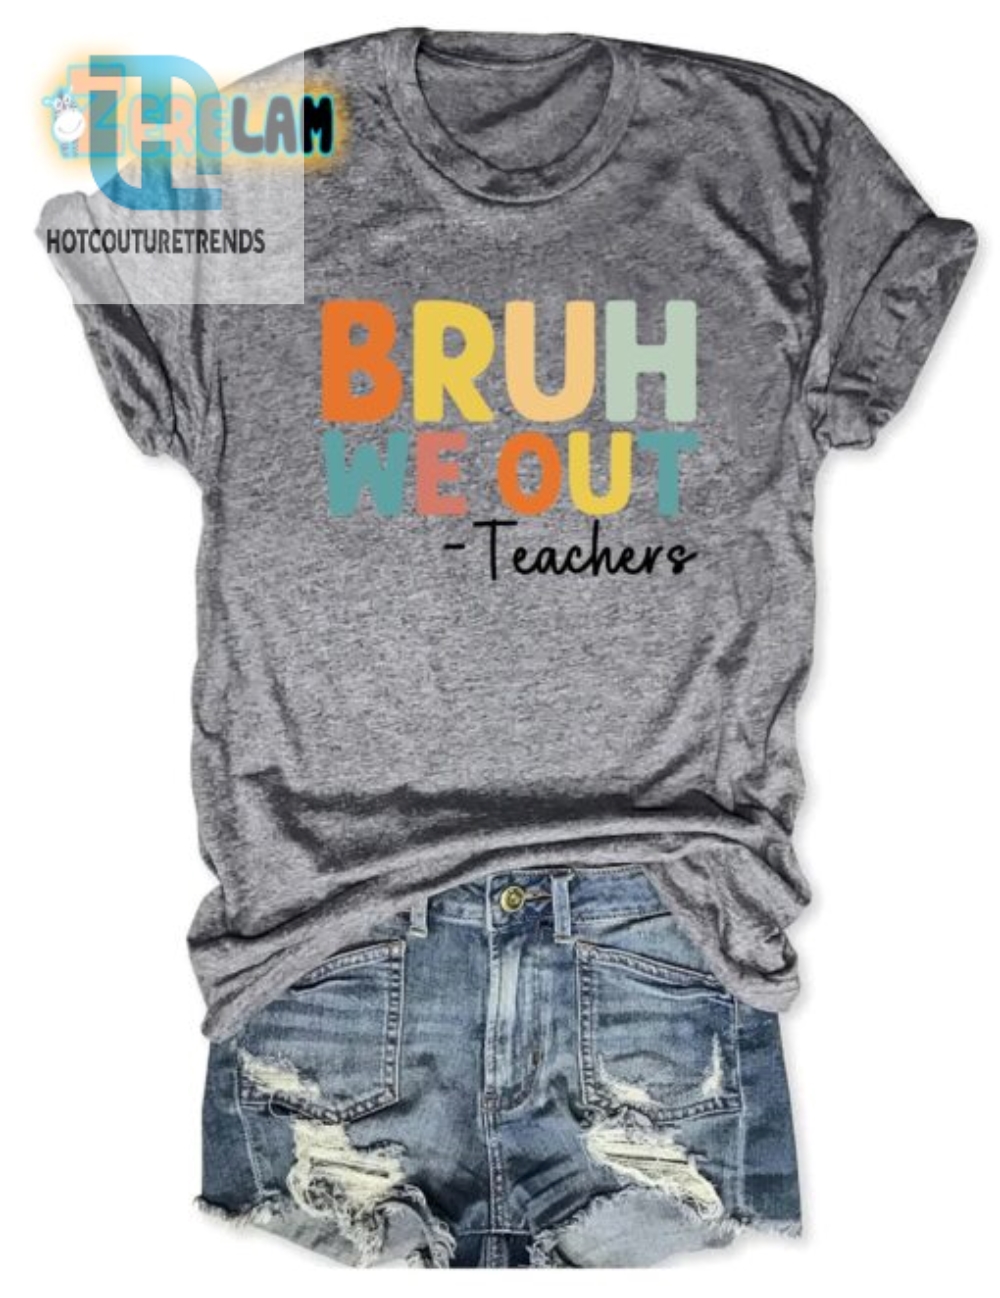 Outta Here Teachers Tee Bruh We Out Funny Shirt